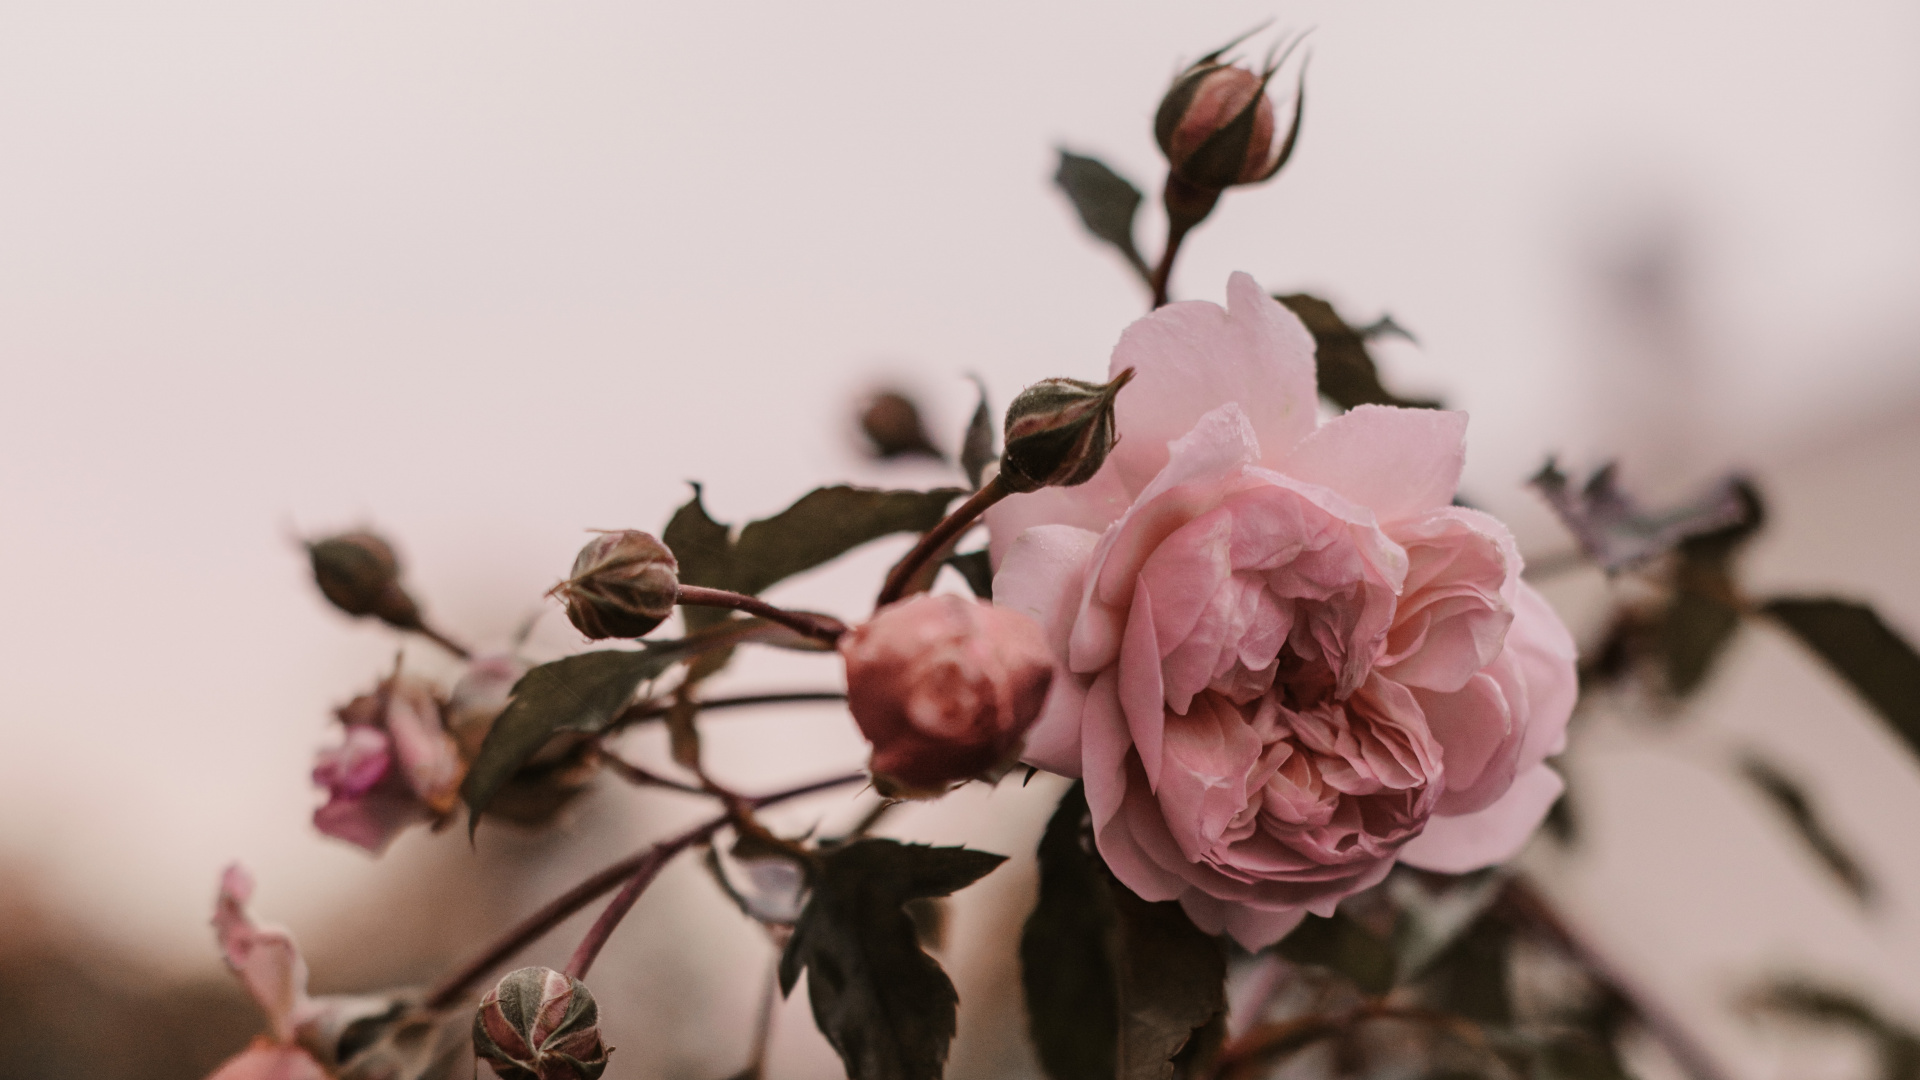 Pink Roses in Bloom During Daytime. Wallpaper in 1920x1080 Resolution